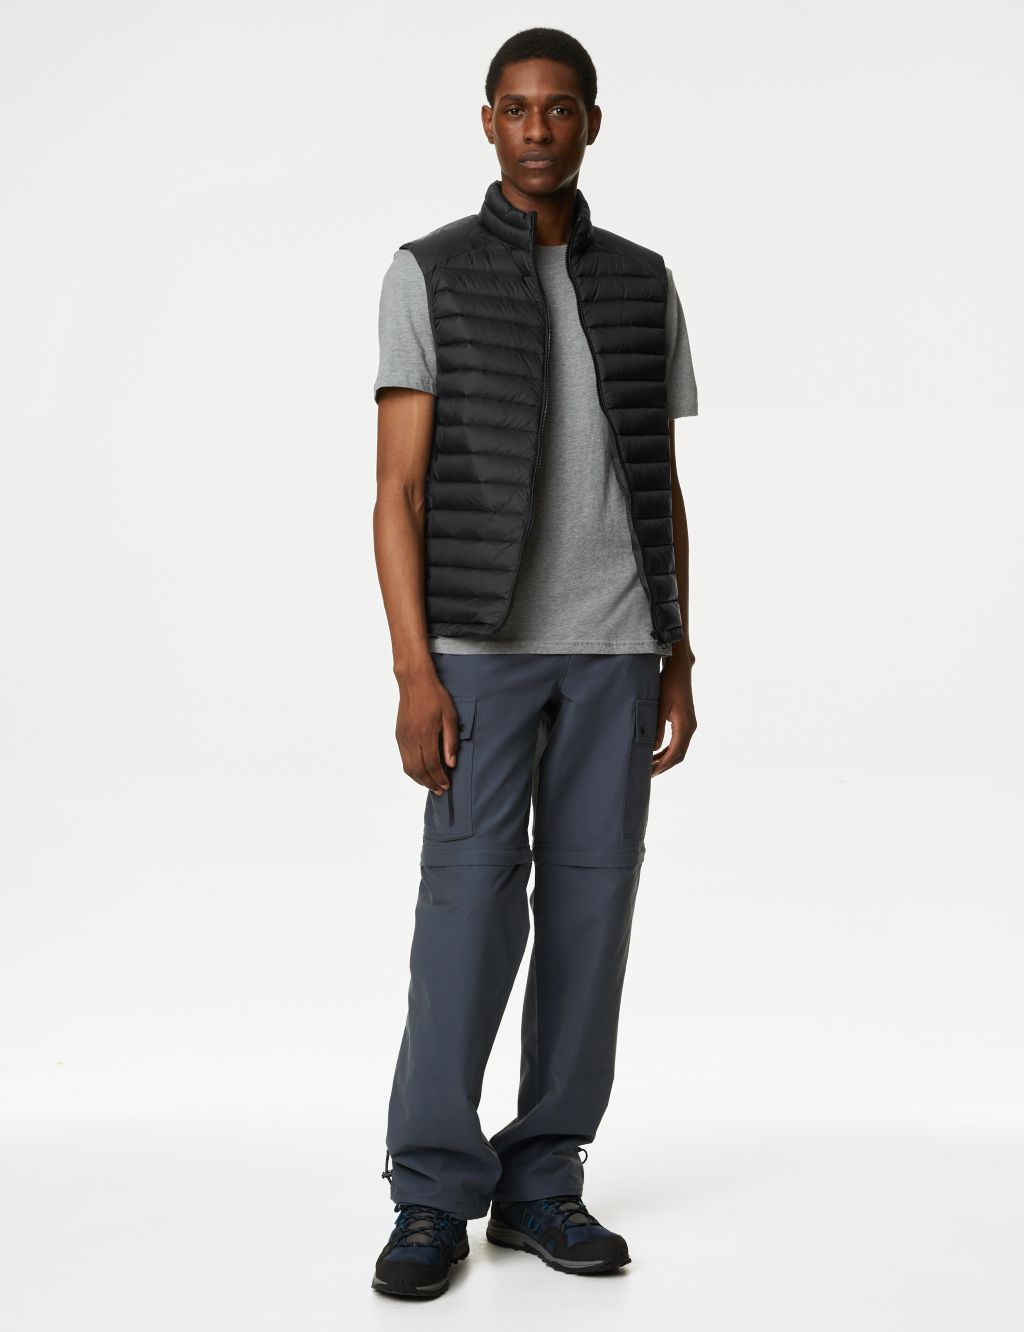 Feather and Down Gilet with Stormwear™ image 3